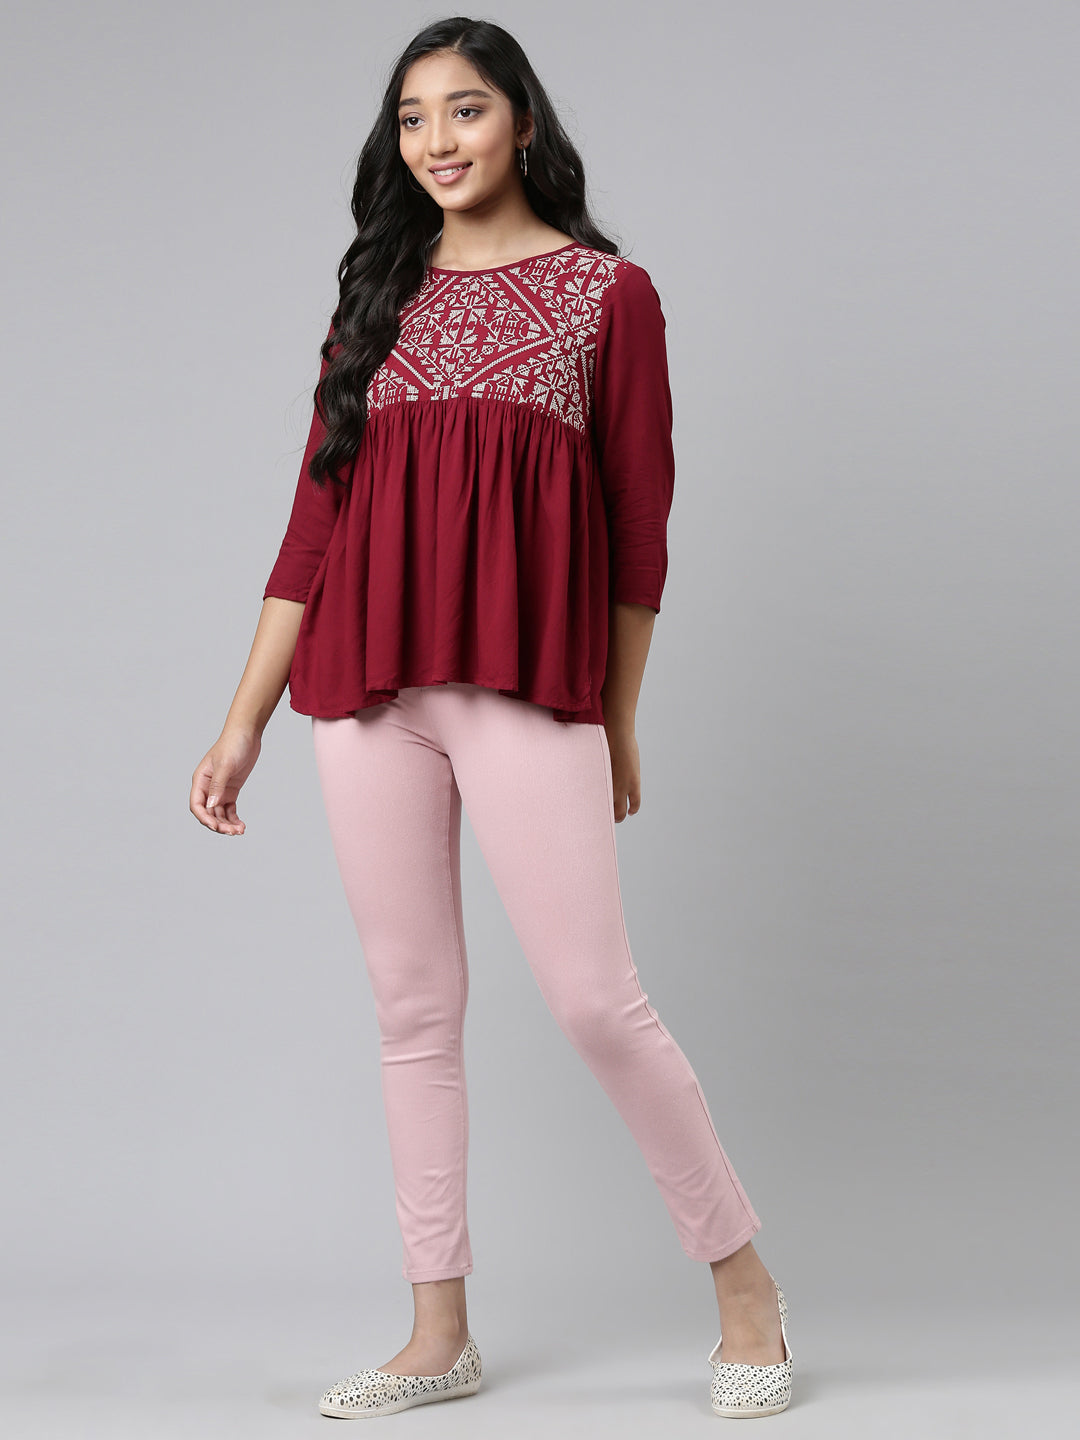 Friday Dressing - Buy Pink Jeggings, Solids Black Tops with Red